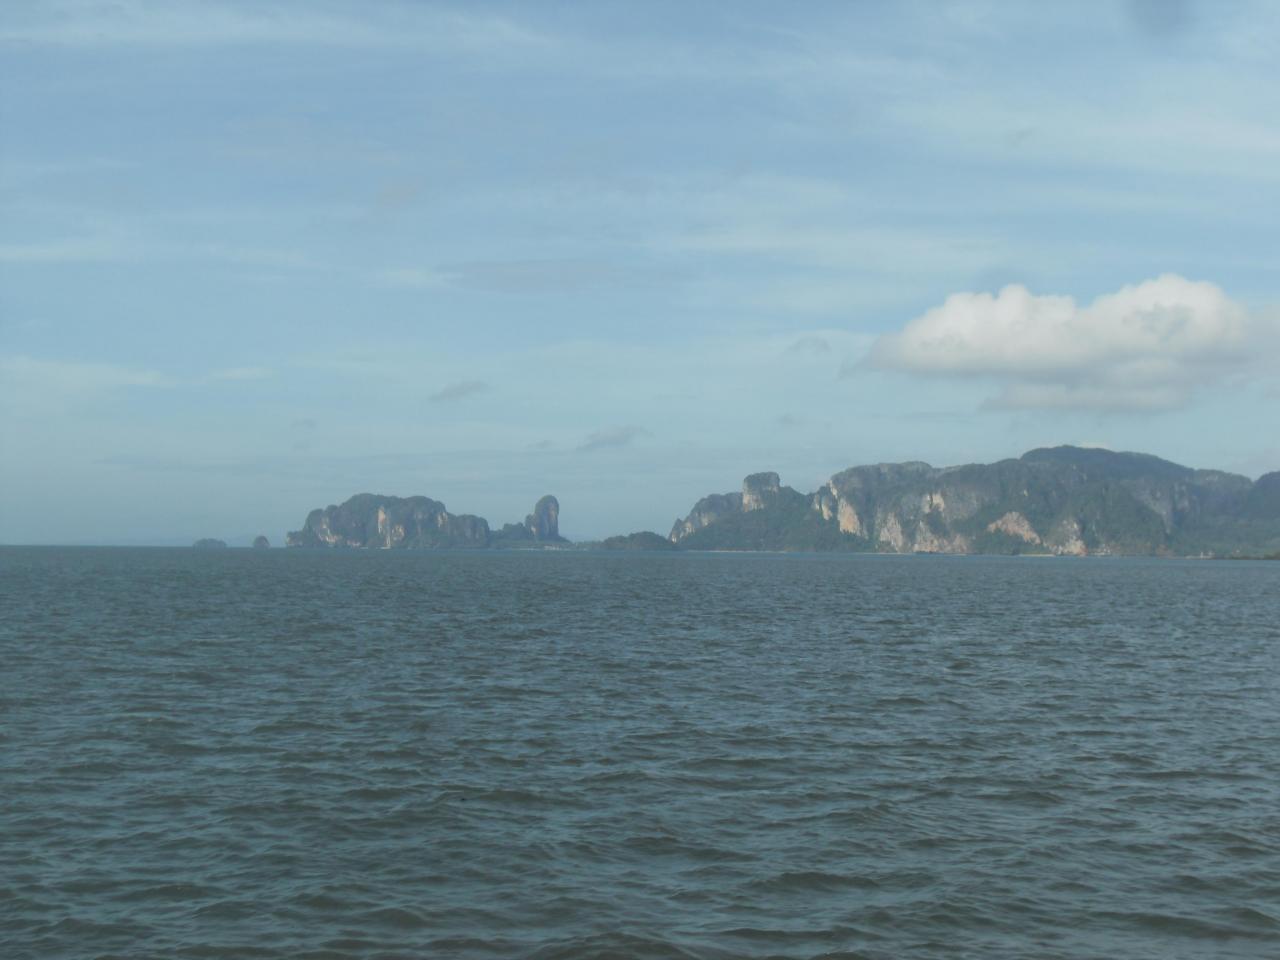 View from the ferry on the way to Koh Phi Phi